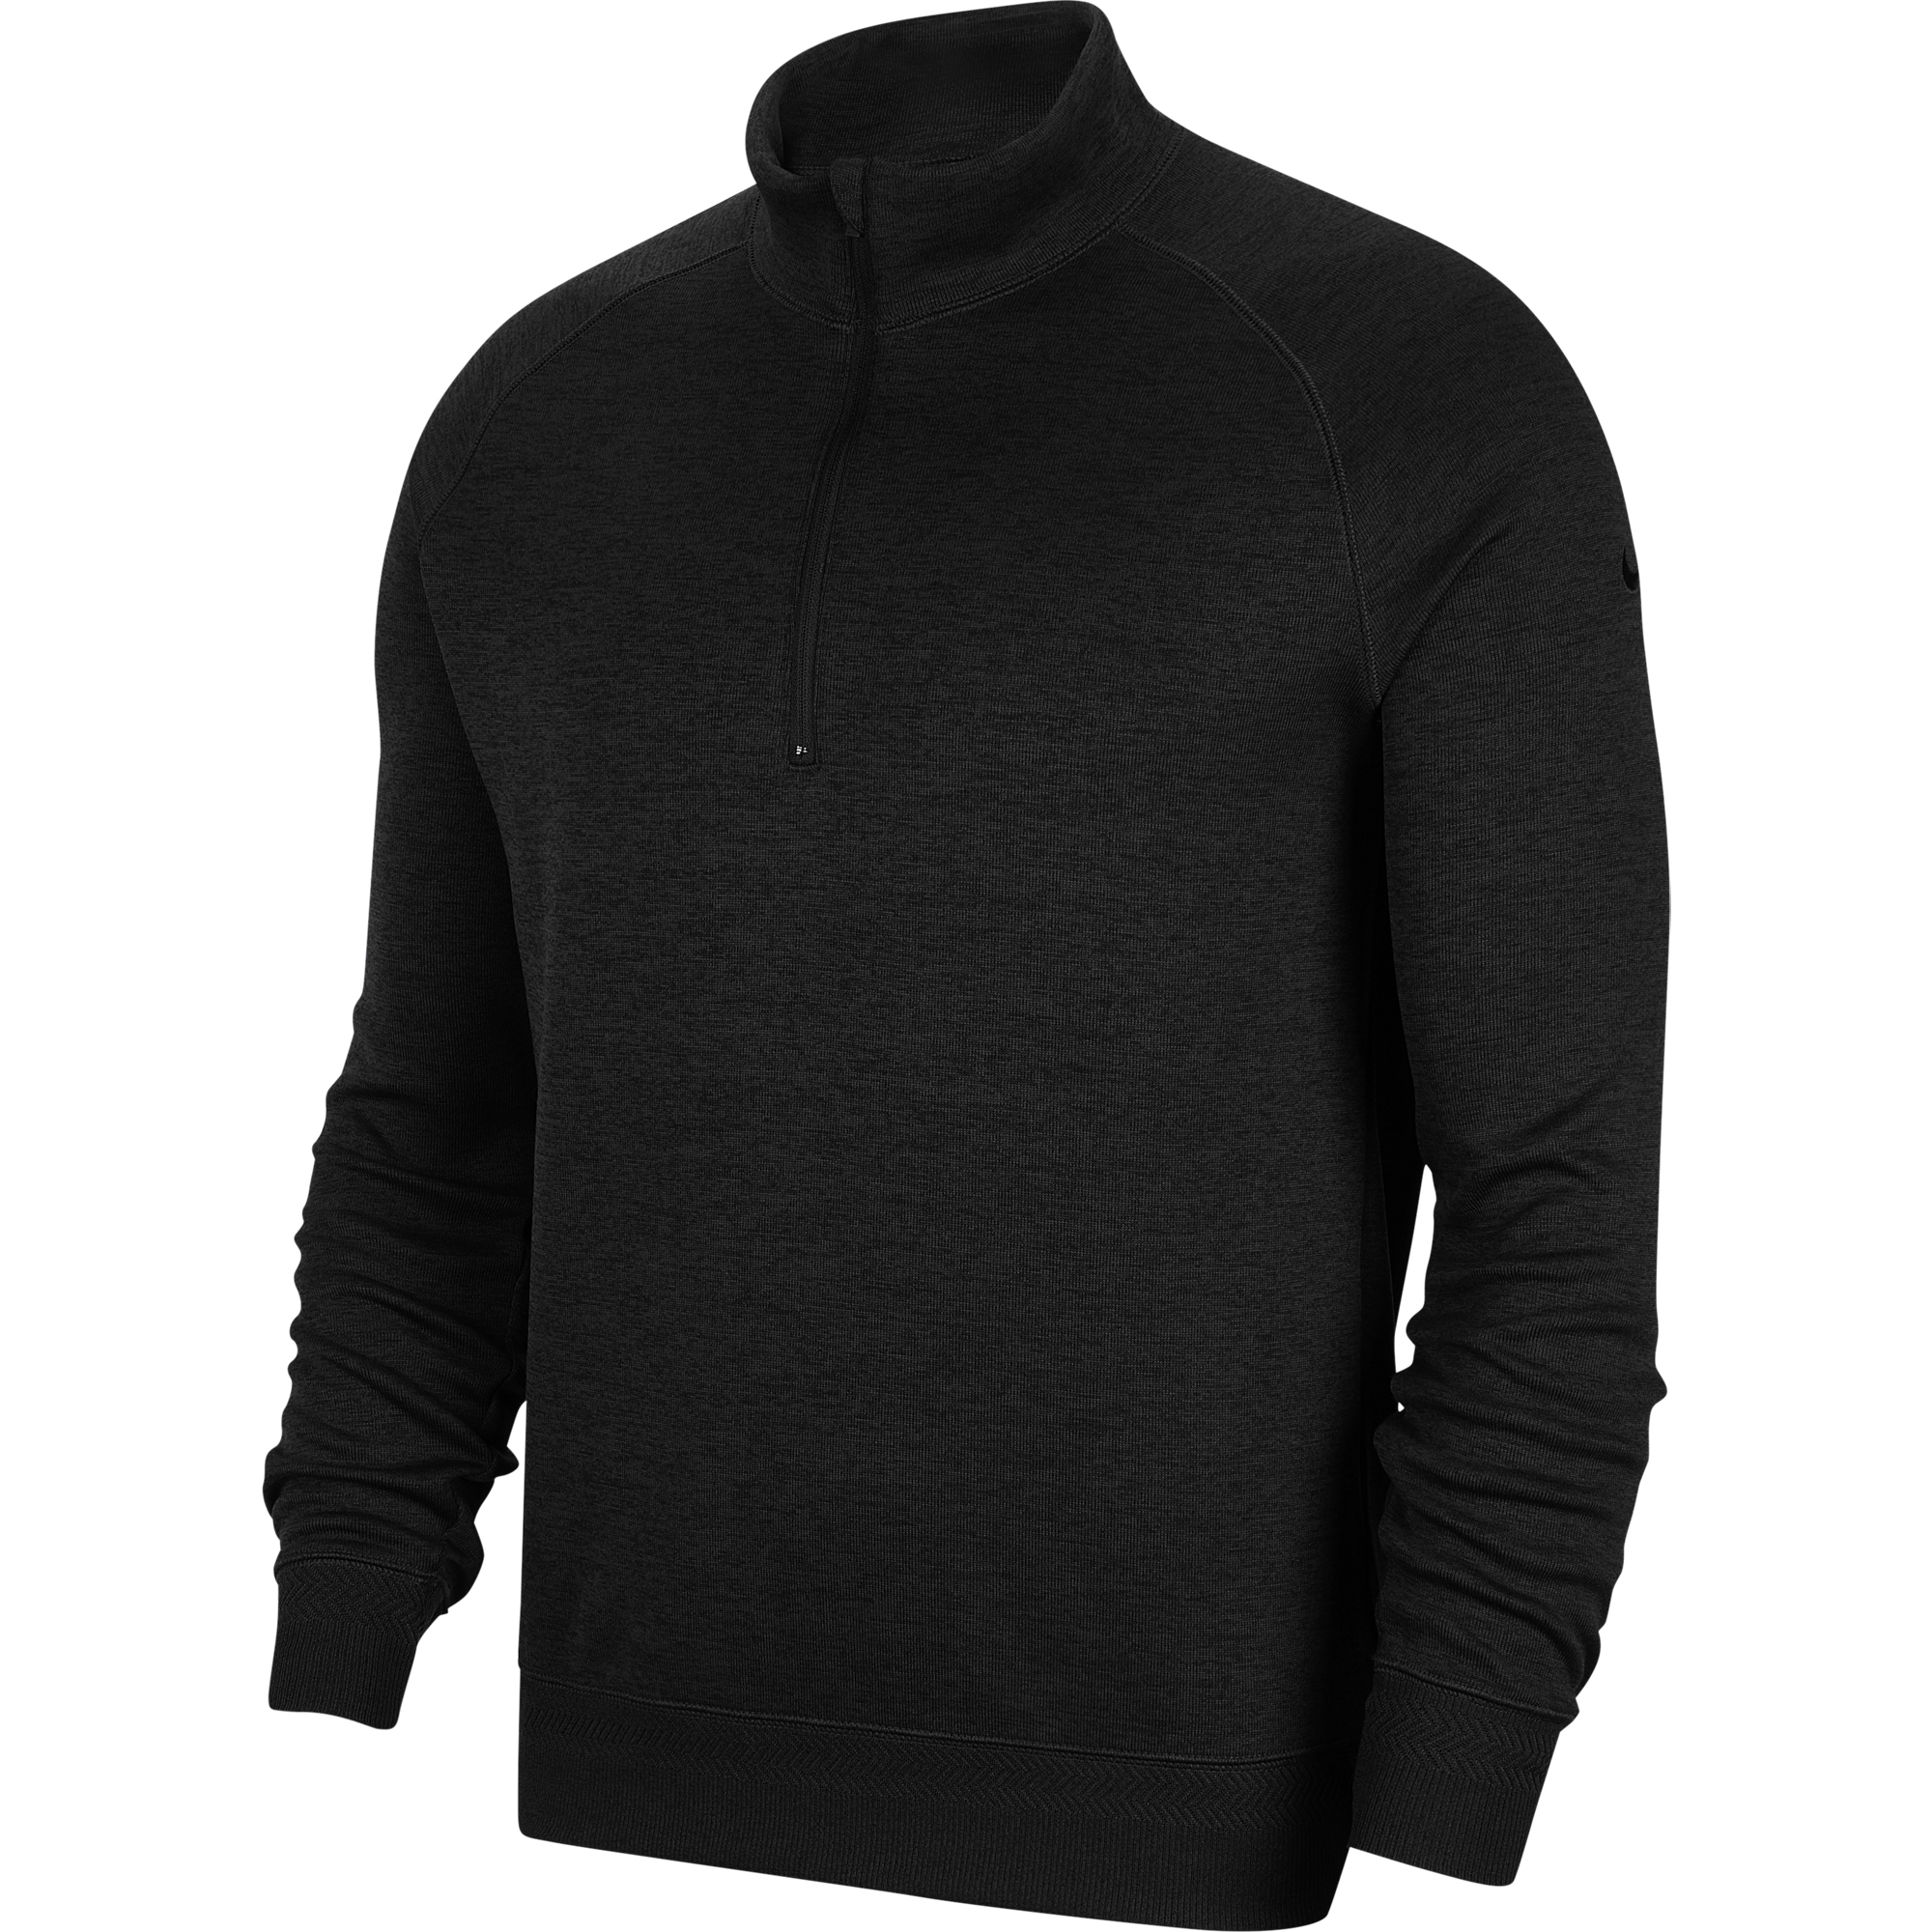 Nike Mens Dry Fit Players Half Zip Wicking Golf Sweater M- Chest 37.5-41